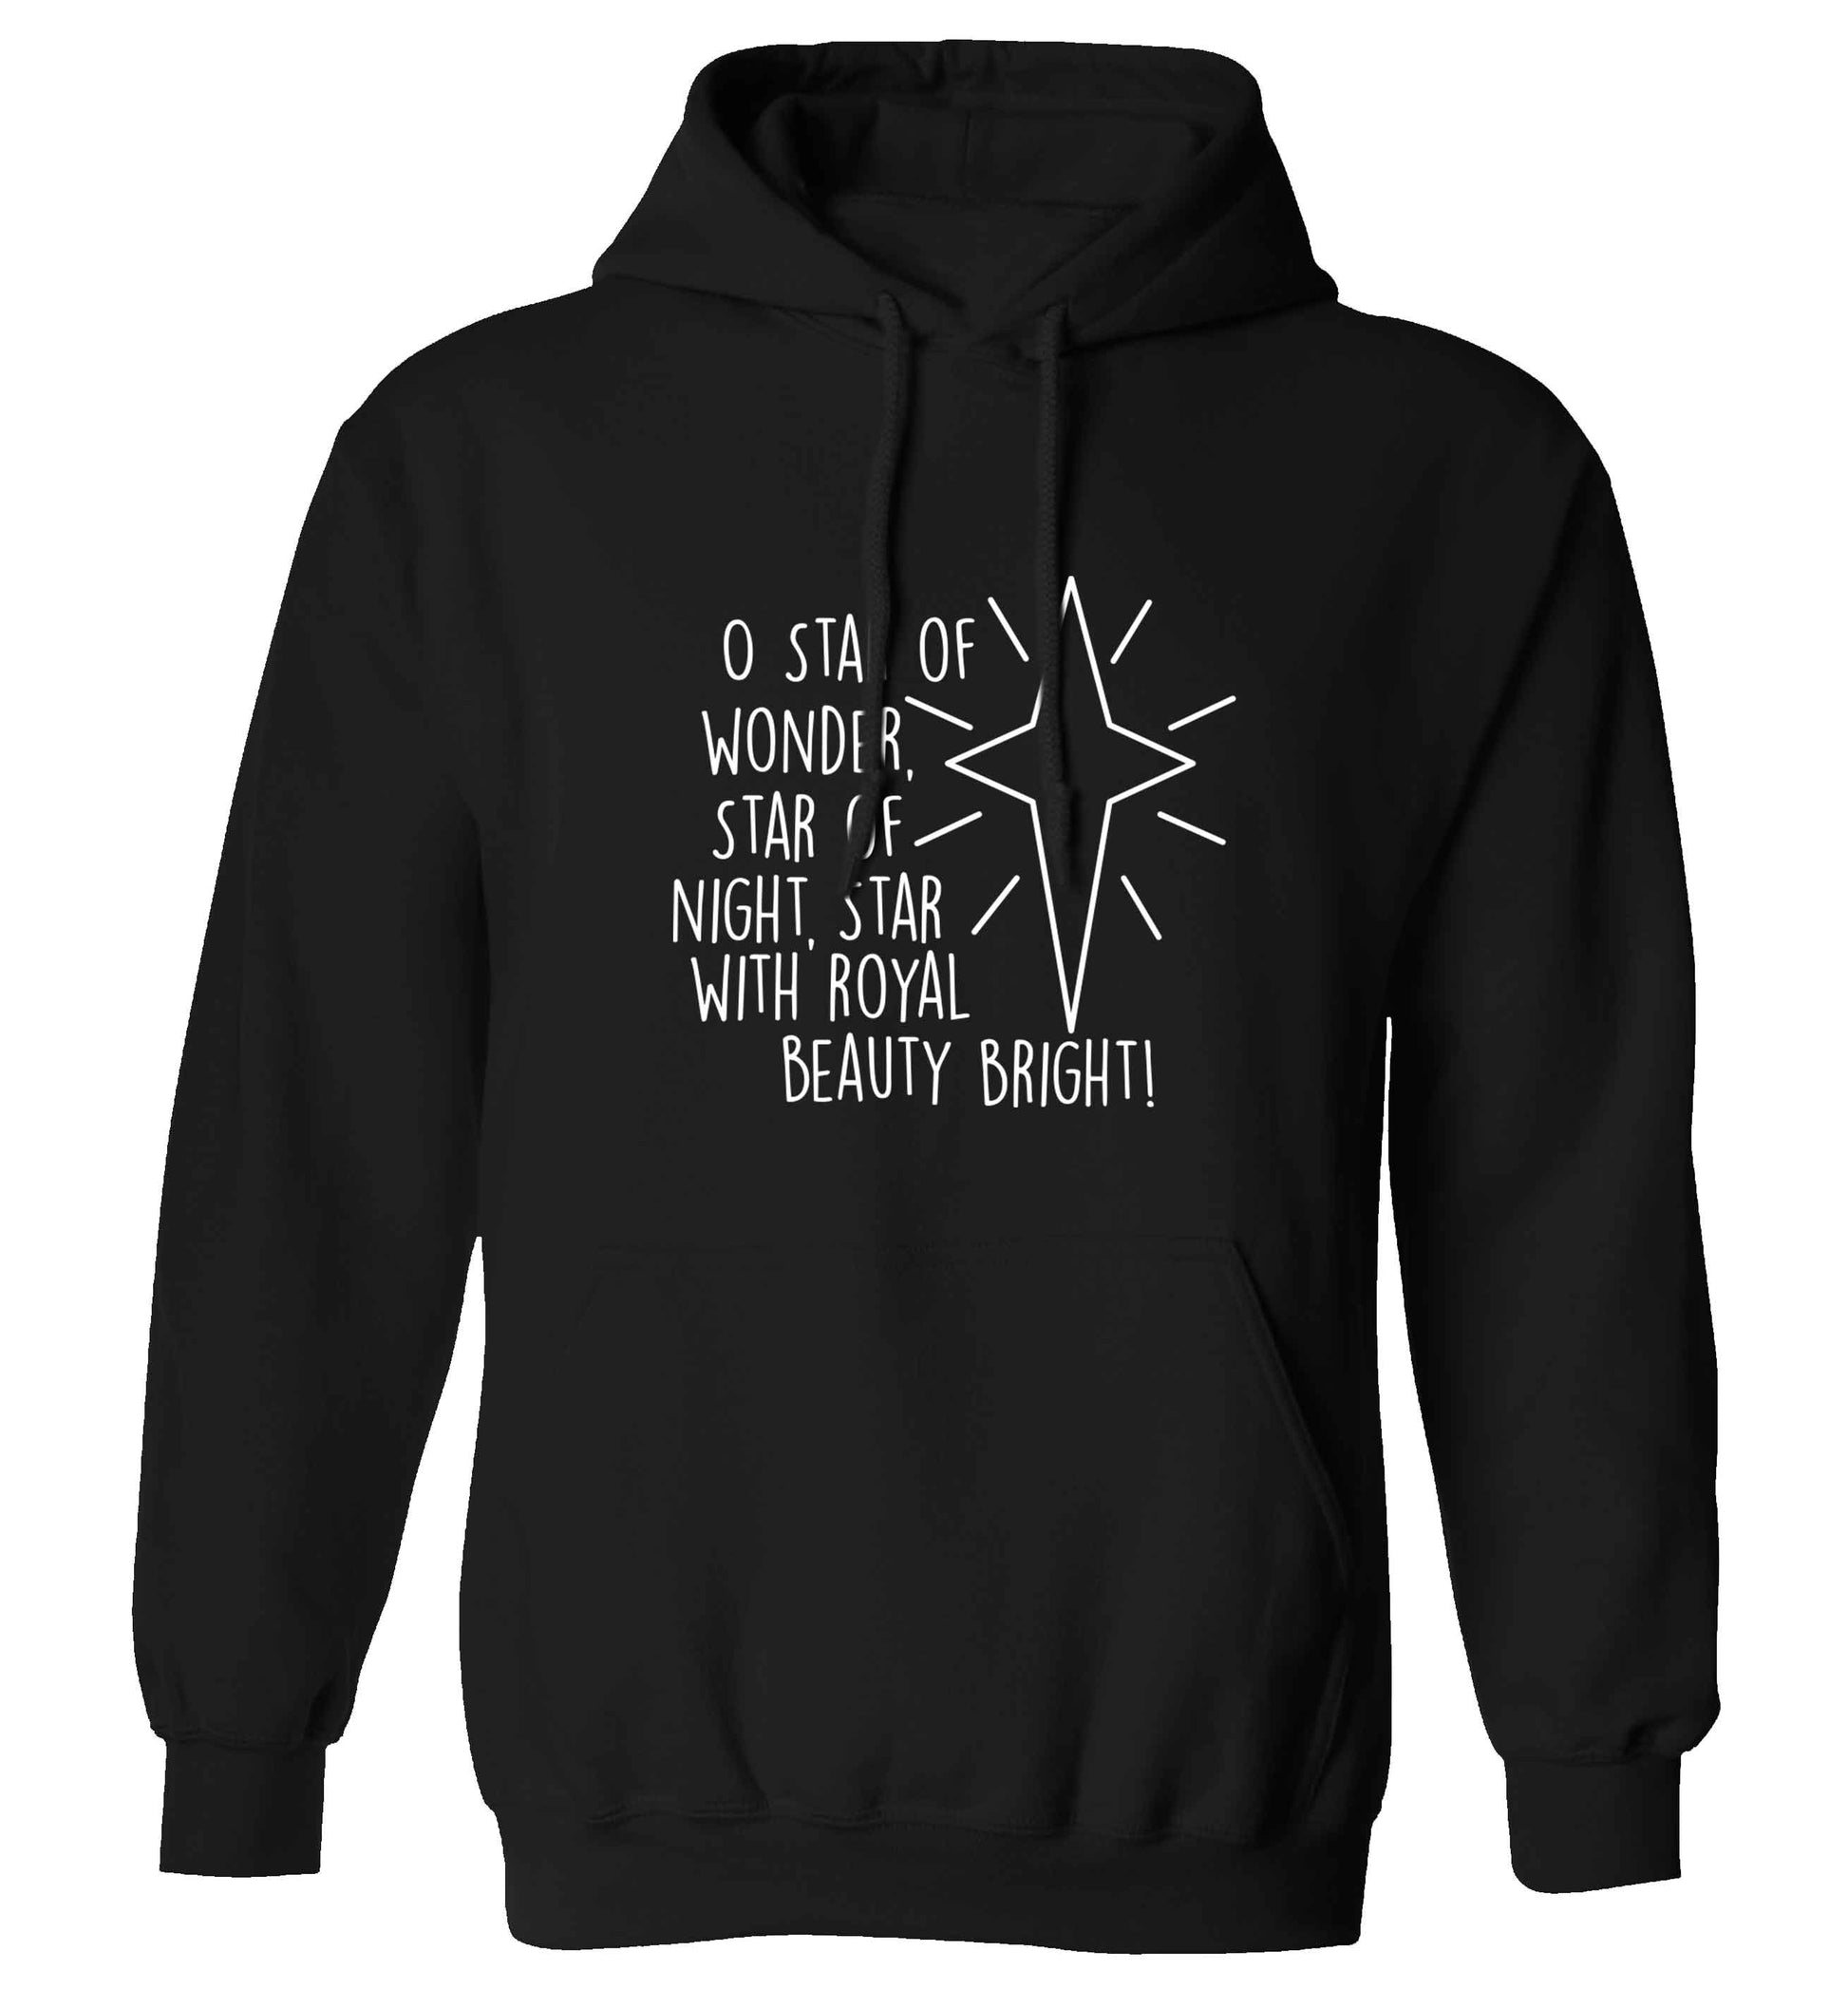 Oh star of wonder star of night, star with royal beauty bright adults unisex black hoodie 2XL